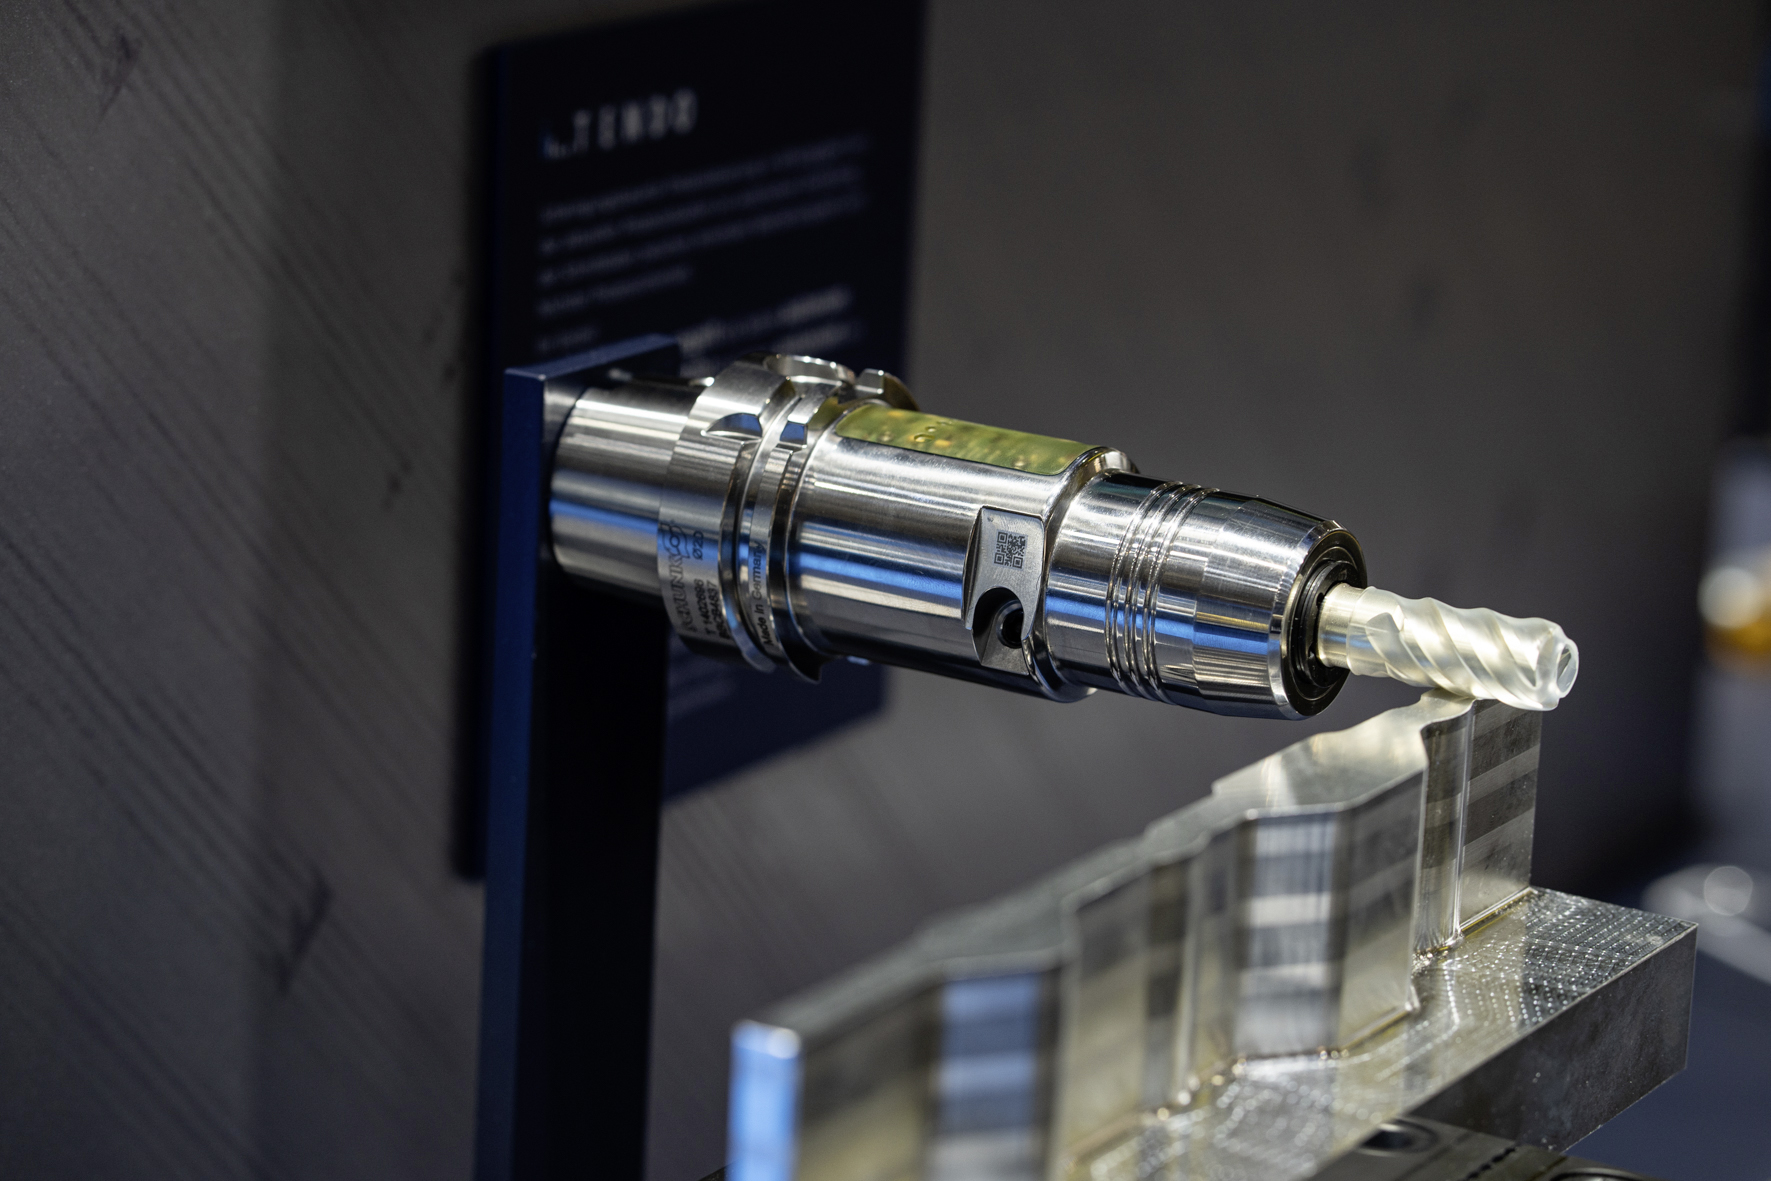 EMO highlight: The smart precision toolholder SCHUNK iTENDO enables real-time process monitoring and control directly on the tool. Photo: SCHUNK